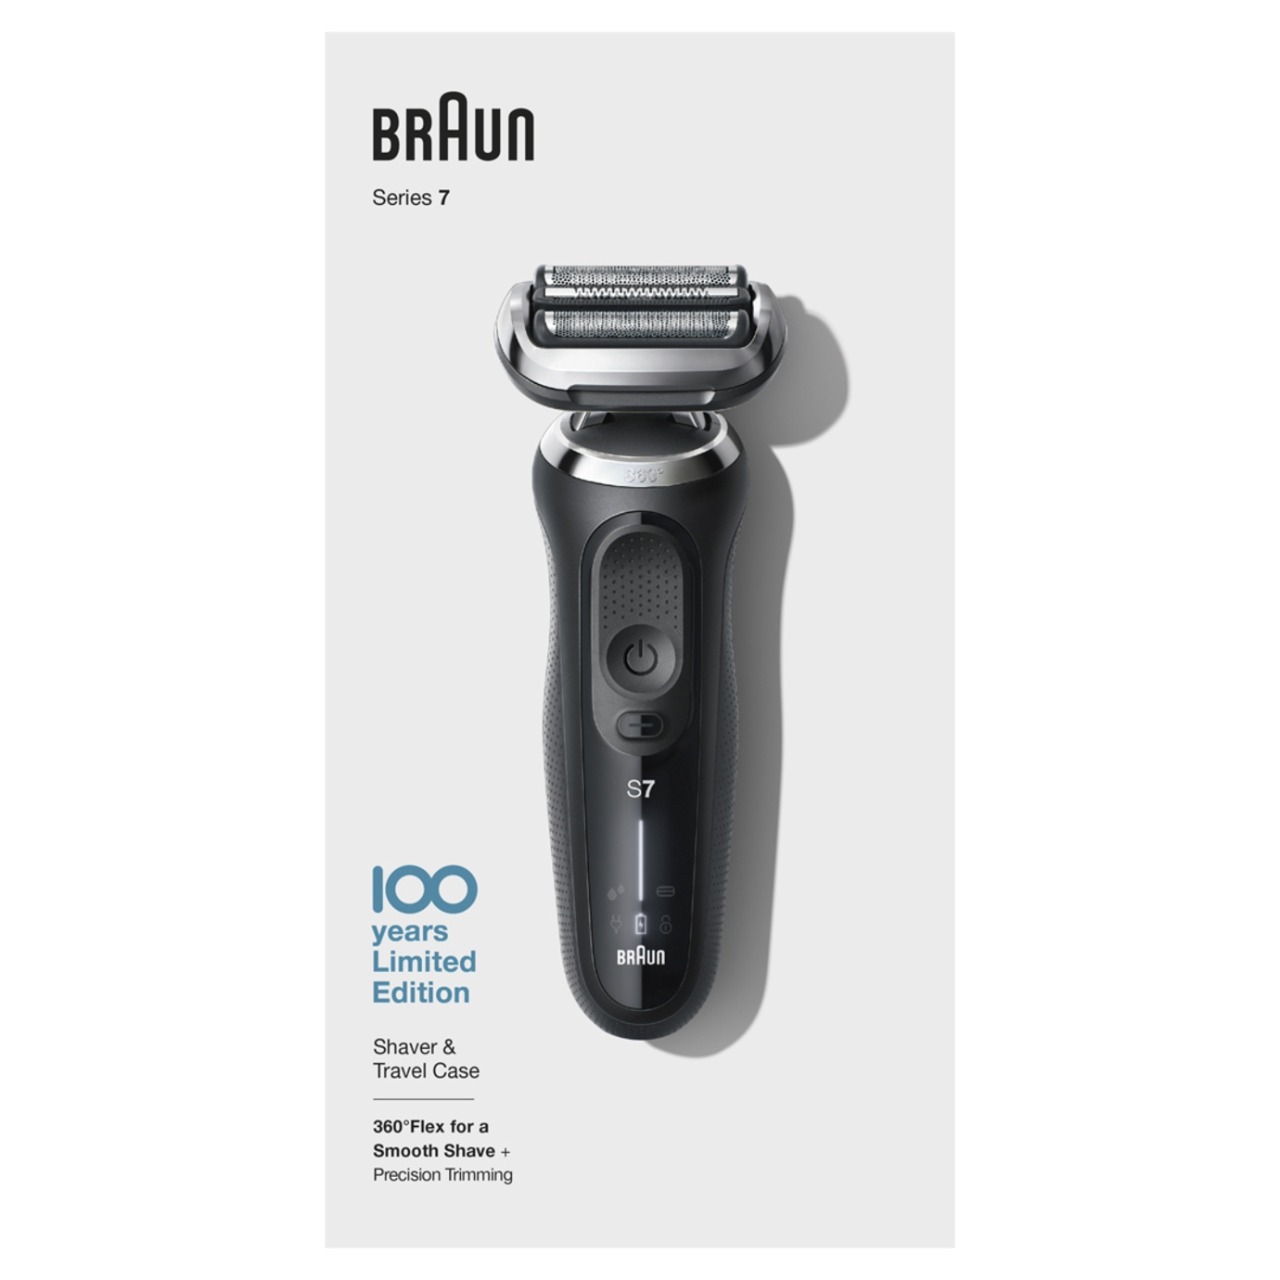 Braun Electric Hair Clipper for men, series 7, for dry & wet use, Black, MBS7